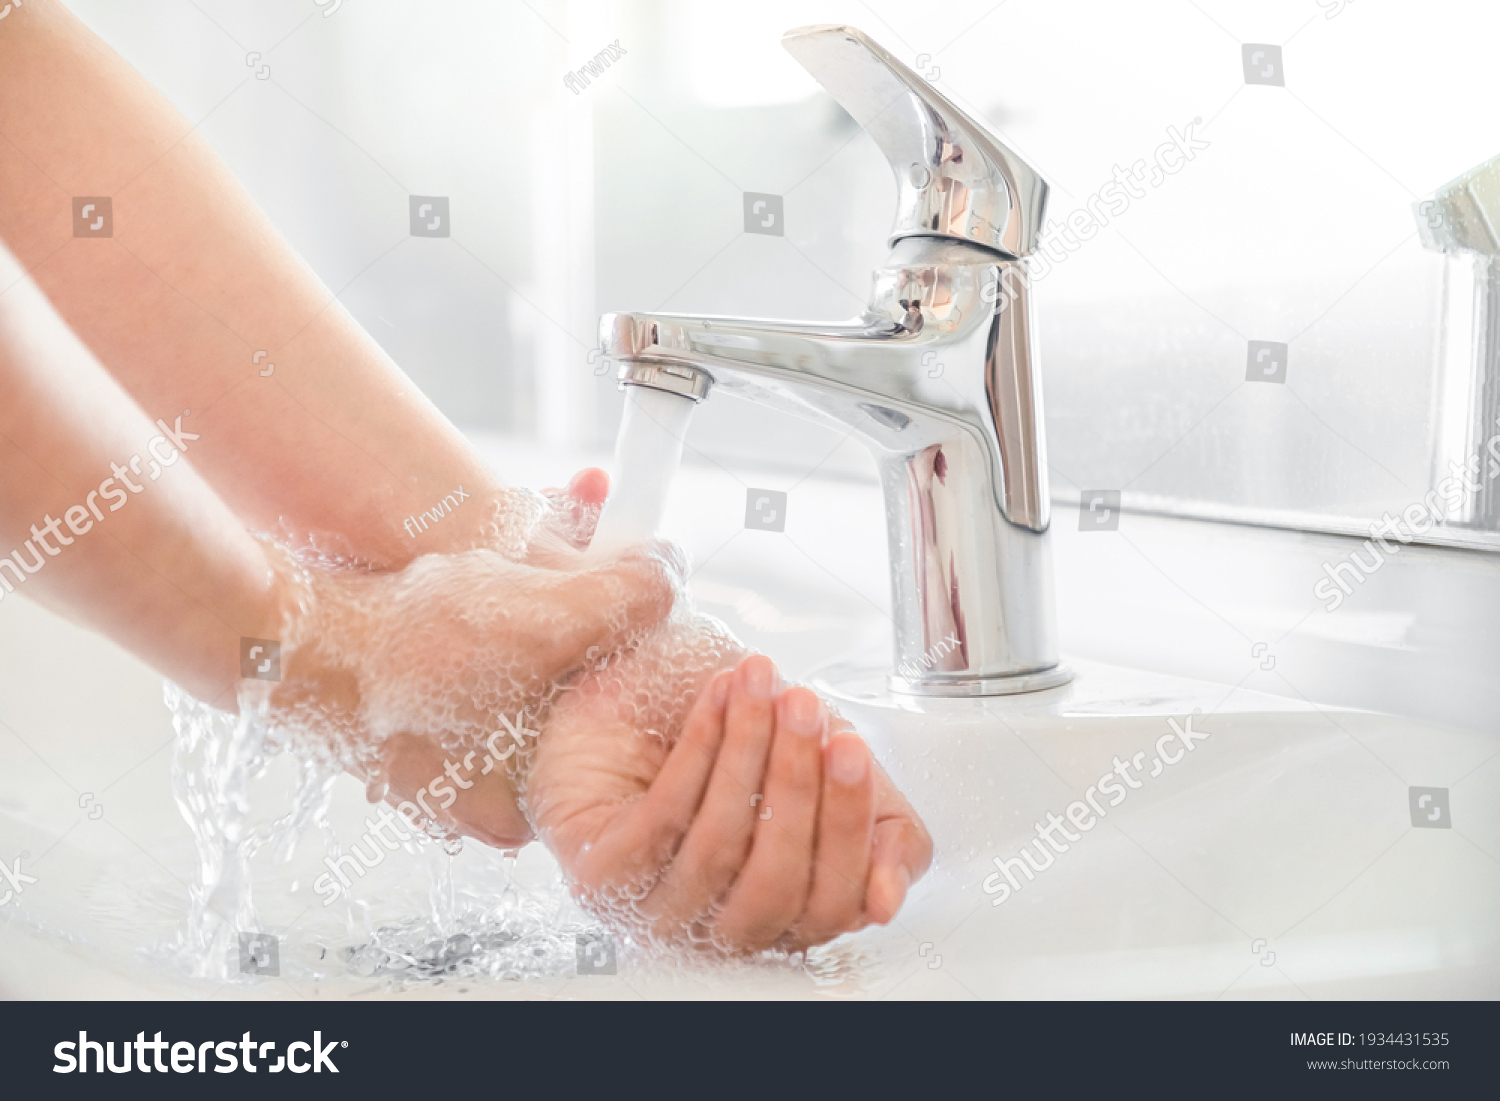 Woman use soap and washing hands rubbing with soap under the water tap. Hygiene new normal concept to stop spreading coronavirus or influenza virus in hospital or public wash room. #1934431535